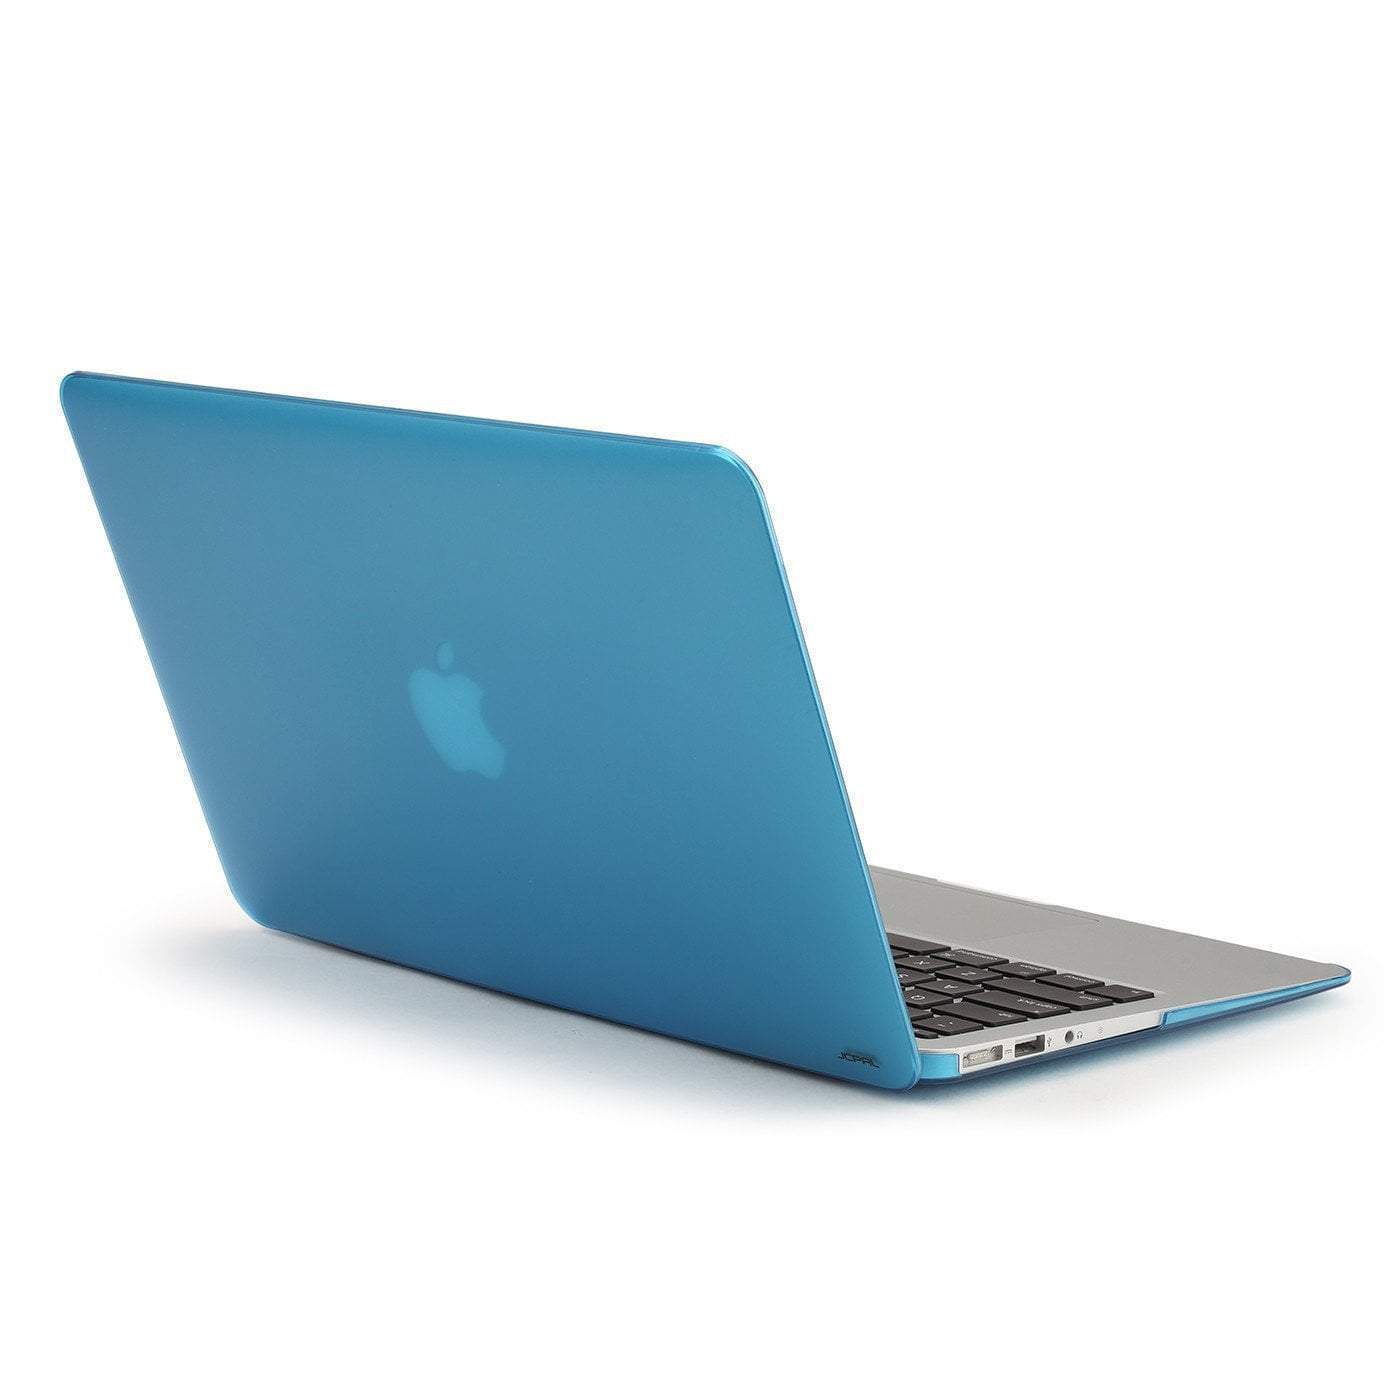 JCPal Case MacGuard Ultra-thin Protective Case for MacBook Air 11" MacBook Air 11" / Blue